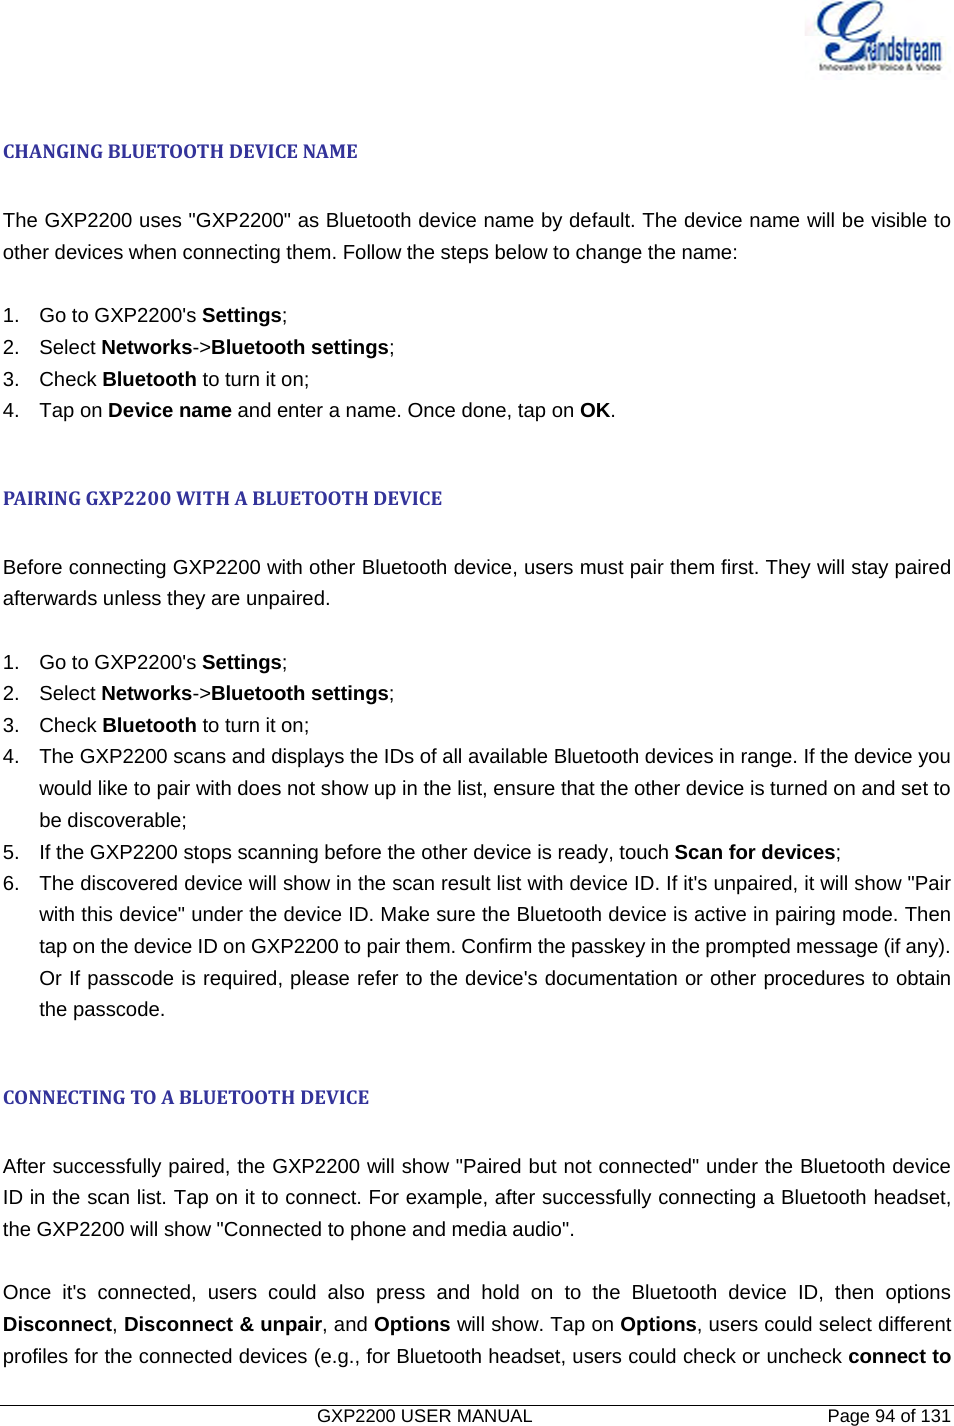   GXP2200 USER MANUAL       Page 94 of 131                                   CHANGINGBLUETOOTHDEVICENAME The GXP2200 uses &quot;GXP2200&quot; as Bluetooth device name by default. The device name will be visible to other devices when connecting them. Follow the steps below to change the name:  1.  Go to GXP2200&apos;s Settings; 2. Select Networks-&gt;Bluetooth settings; 3. Check Bluetooth to turn it on; 4. Tap on Device name and enter a name. Once done, tap on OK.  PAIRINGGXP2200WITHABLUETOOTHDEVICE Before connecting GXP2200 with other Bluetooth device, users must pair them first. They will stay paired afterwards unless they are unpaired. 1.  Go to GXP2200&apos;s Settings; 2. Select Networks-&gt;Bluetooth settings; 3. Check Bluetooth to turn it on; 4.  The GXP2200 scans and displays the IDs of all available Bluetooth devices in range. If the device you would like to pair with does not show up in the list, ensure that the other device is turned on and set to be discoverable; 5.  If the GXP2200 stops scanning before the other device is ready, touch Scan for devices; 6.  The discovered device will show in the scan result list with device ID. If it&apos;s unpaired, it will show &quot;Pair with this device&quot; under the device ID. Make sure the Bluetooth device is active in pairing mode. Then tap on the device ID on GXP2200 to pair them. Confirm the passkey in the prompted message (if any). Or If passcode is required, please refer to the device&apos;s documentation or other procedures to obtain the passcode.  CONNECTINGTOABLUETOOTHDEVICE After successfully paired, the GXP2200 will show &quot;Paired but not connected&quot; under the Bluetooth device ID in the scan list. Tap on it to connect. For example, after successfully connecting a Bluetooth headset, the GXP2200 will show &quot;Connected to phone and media audio&quot;.  Once it&apos;s connected, users could also press and hold on to the Bluetooth device ID, then options Disconnect, Disconnect &amp; unpair, and Options will show. Tap on Options, users could select different profiles for the connected devices (e.g., for Bluetooth headset, users could check or uncheck connect to 